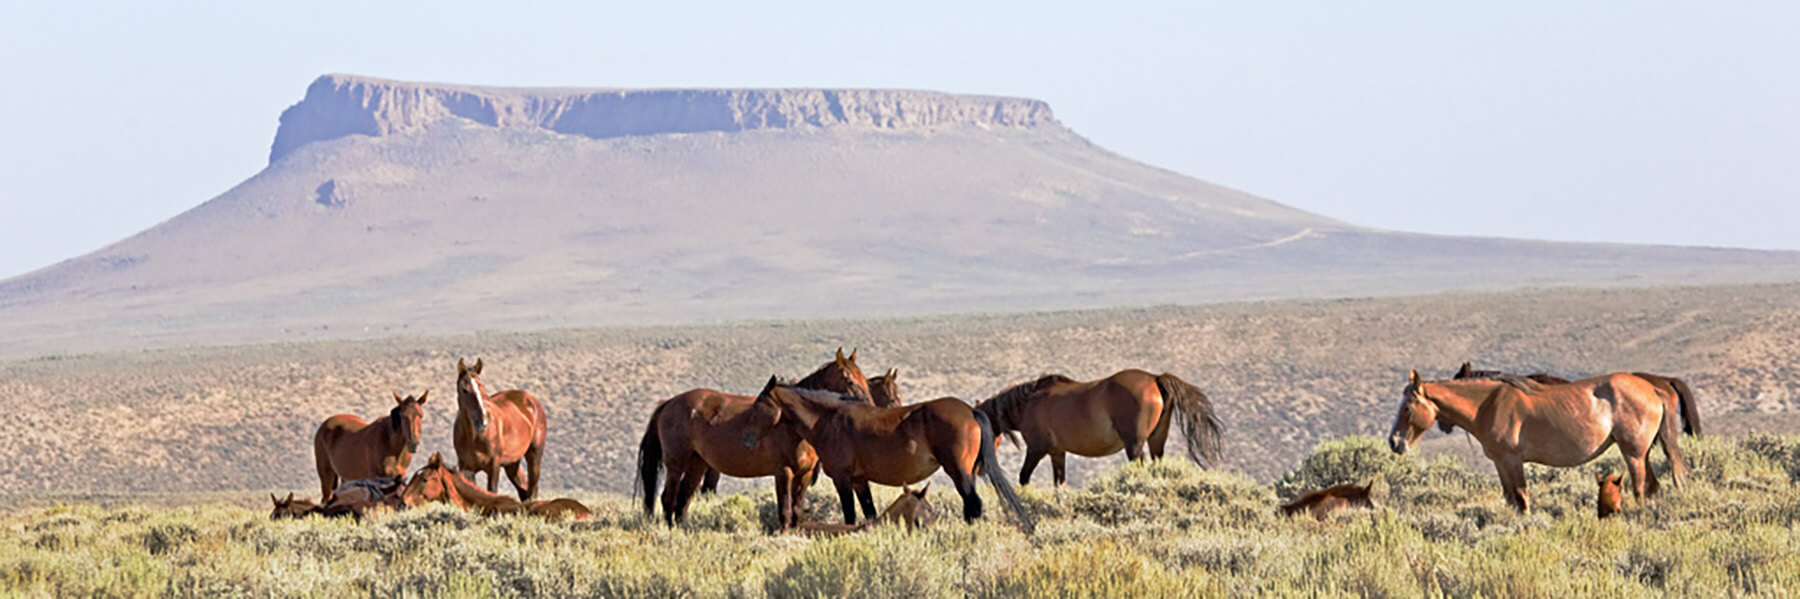 Wild horses seen in front of Pilot Butte rock formation in Wyoming